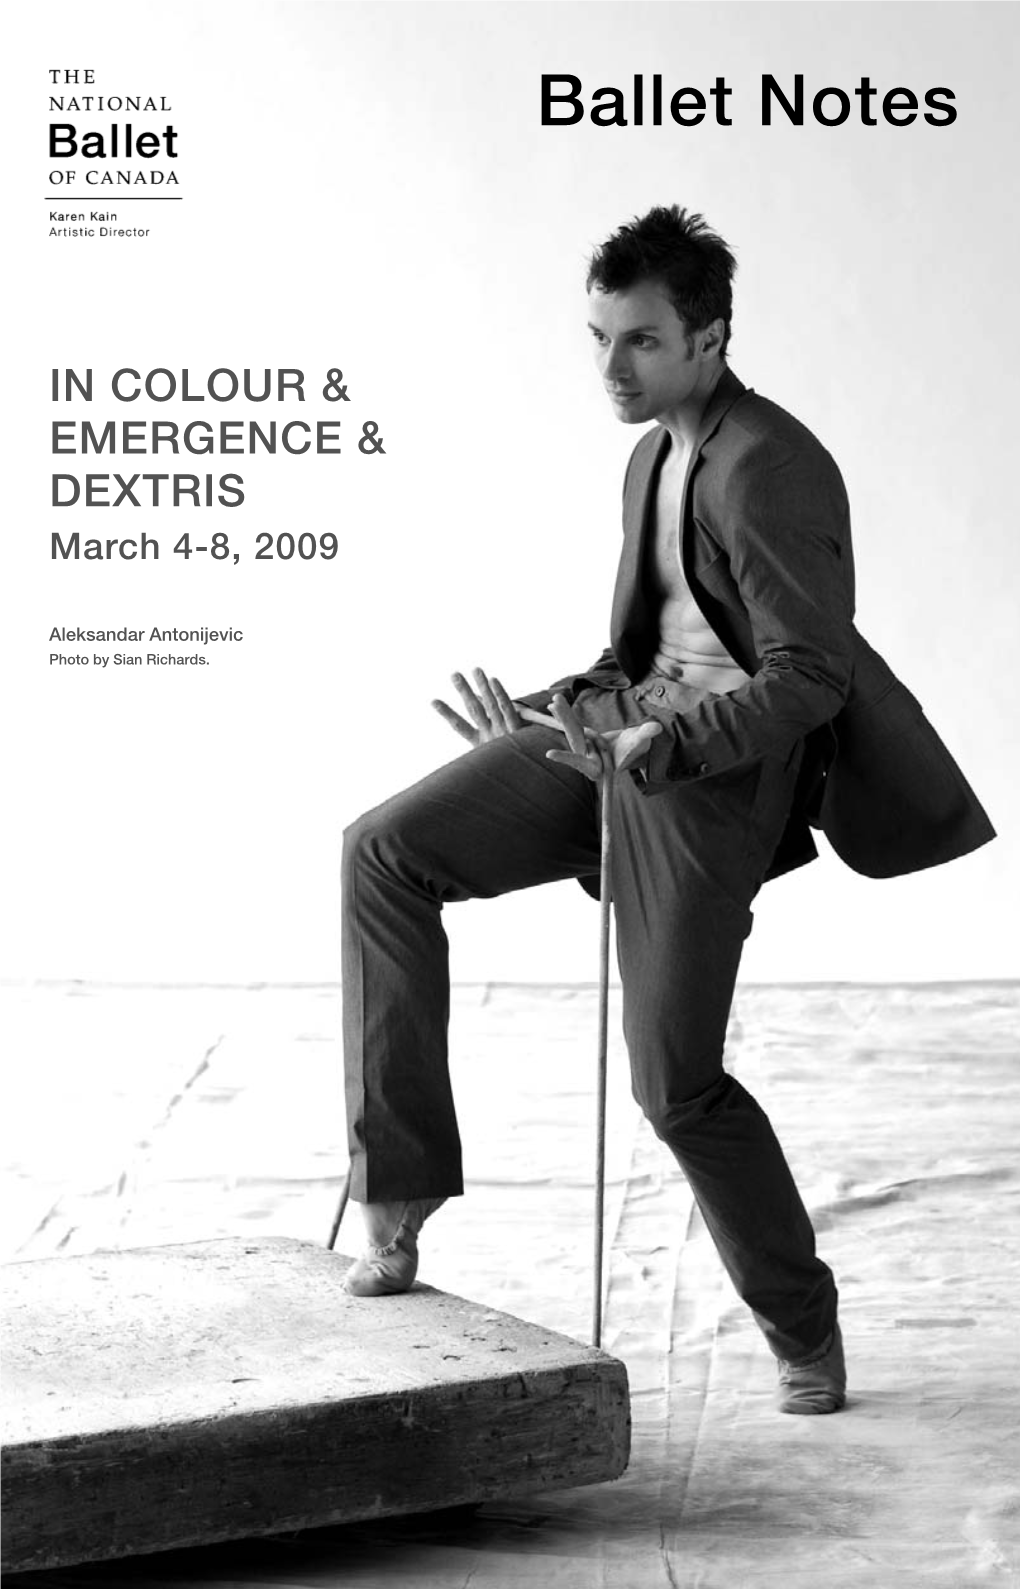 In Colour & Emergence & Dextris